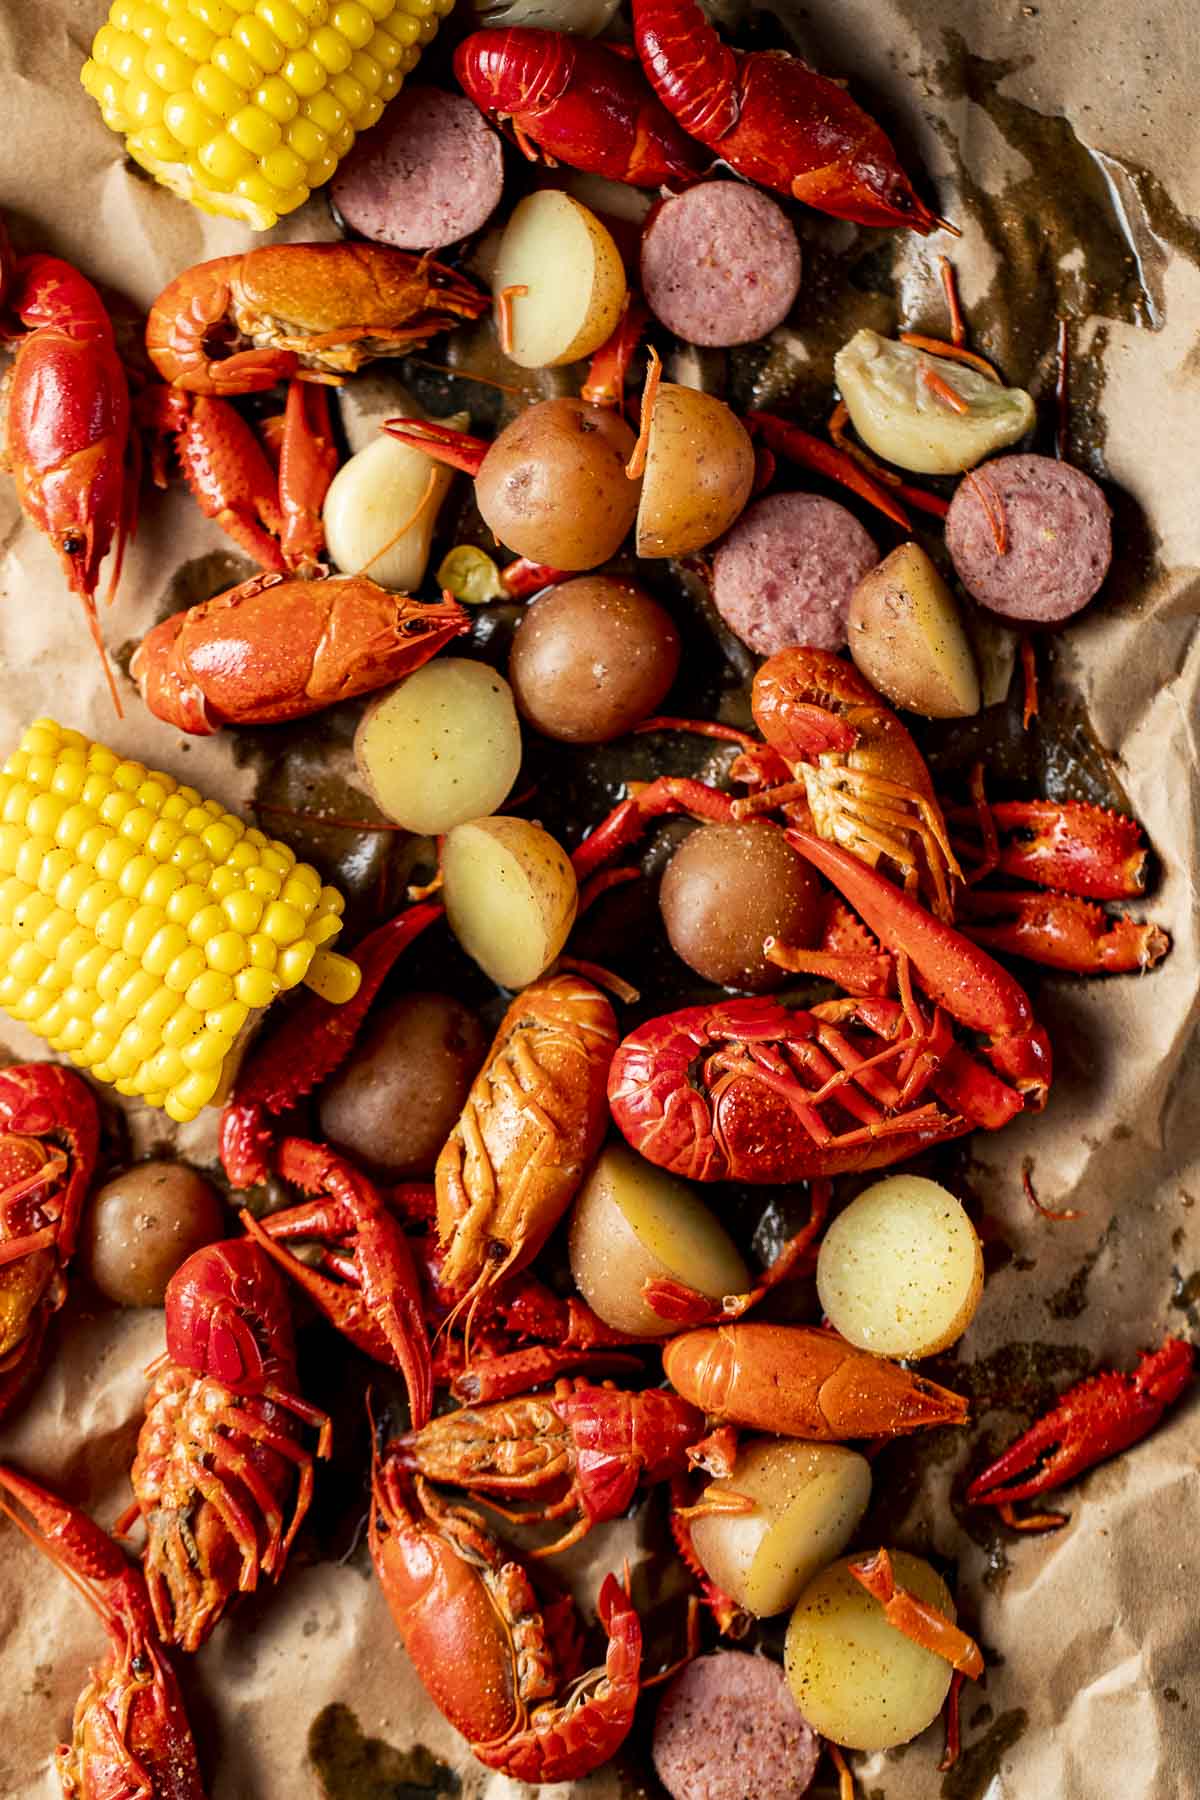 Click this image to download the Crawfish Boil Recipe